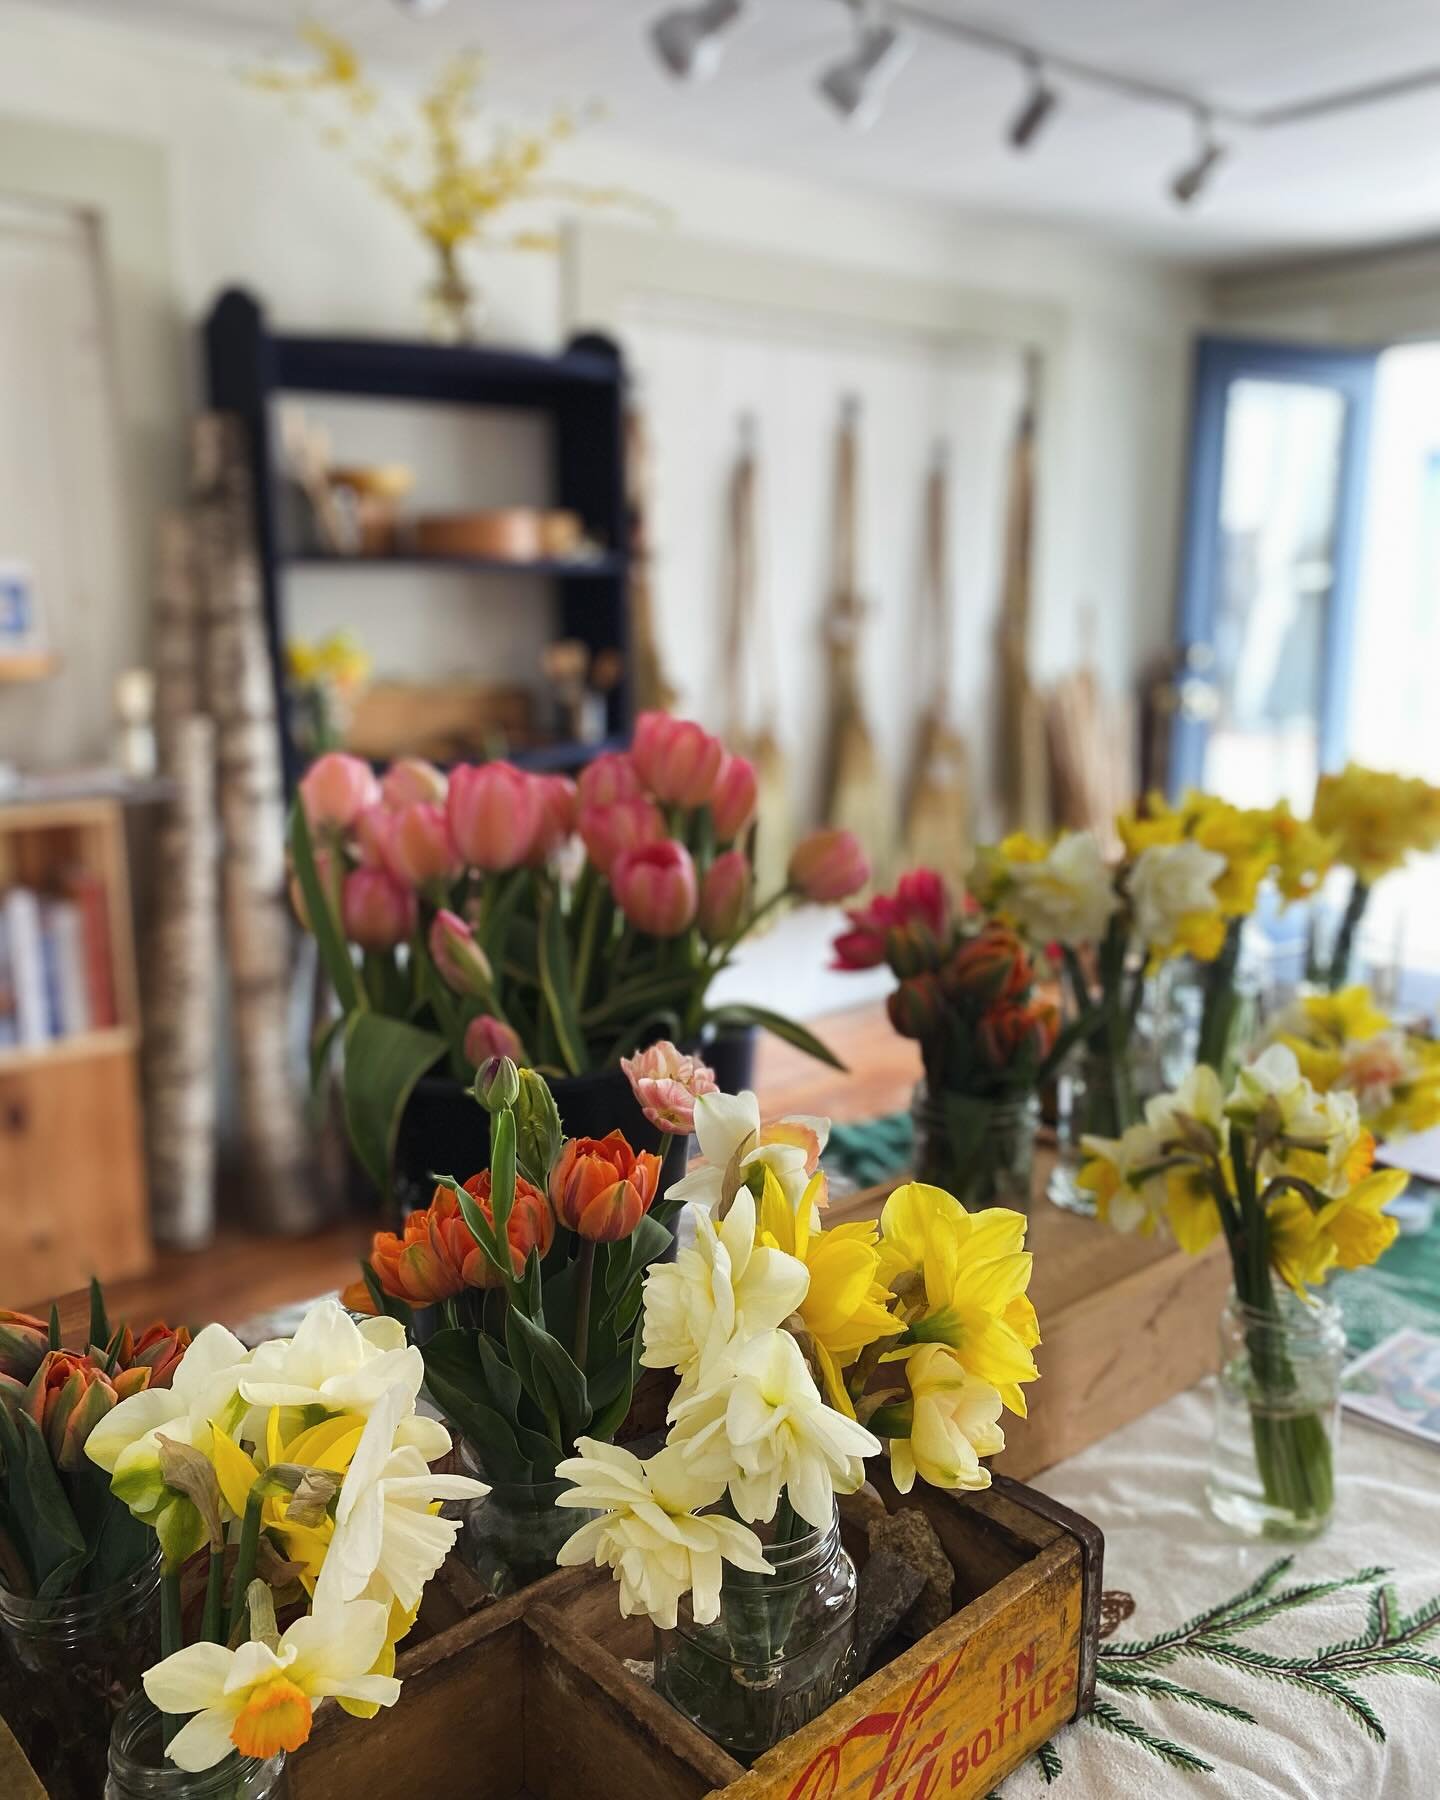 Our #flowerpopup was good fun at @villagehandcraft yesterday. We met great people and chatted veggies, flowers and #hungerinmaine. We also gave some #flowerjoy to Deb at @reds_eats  and other local shops including @wbaygallery @oldandeverlasting and 